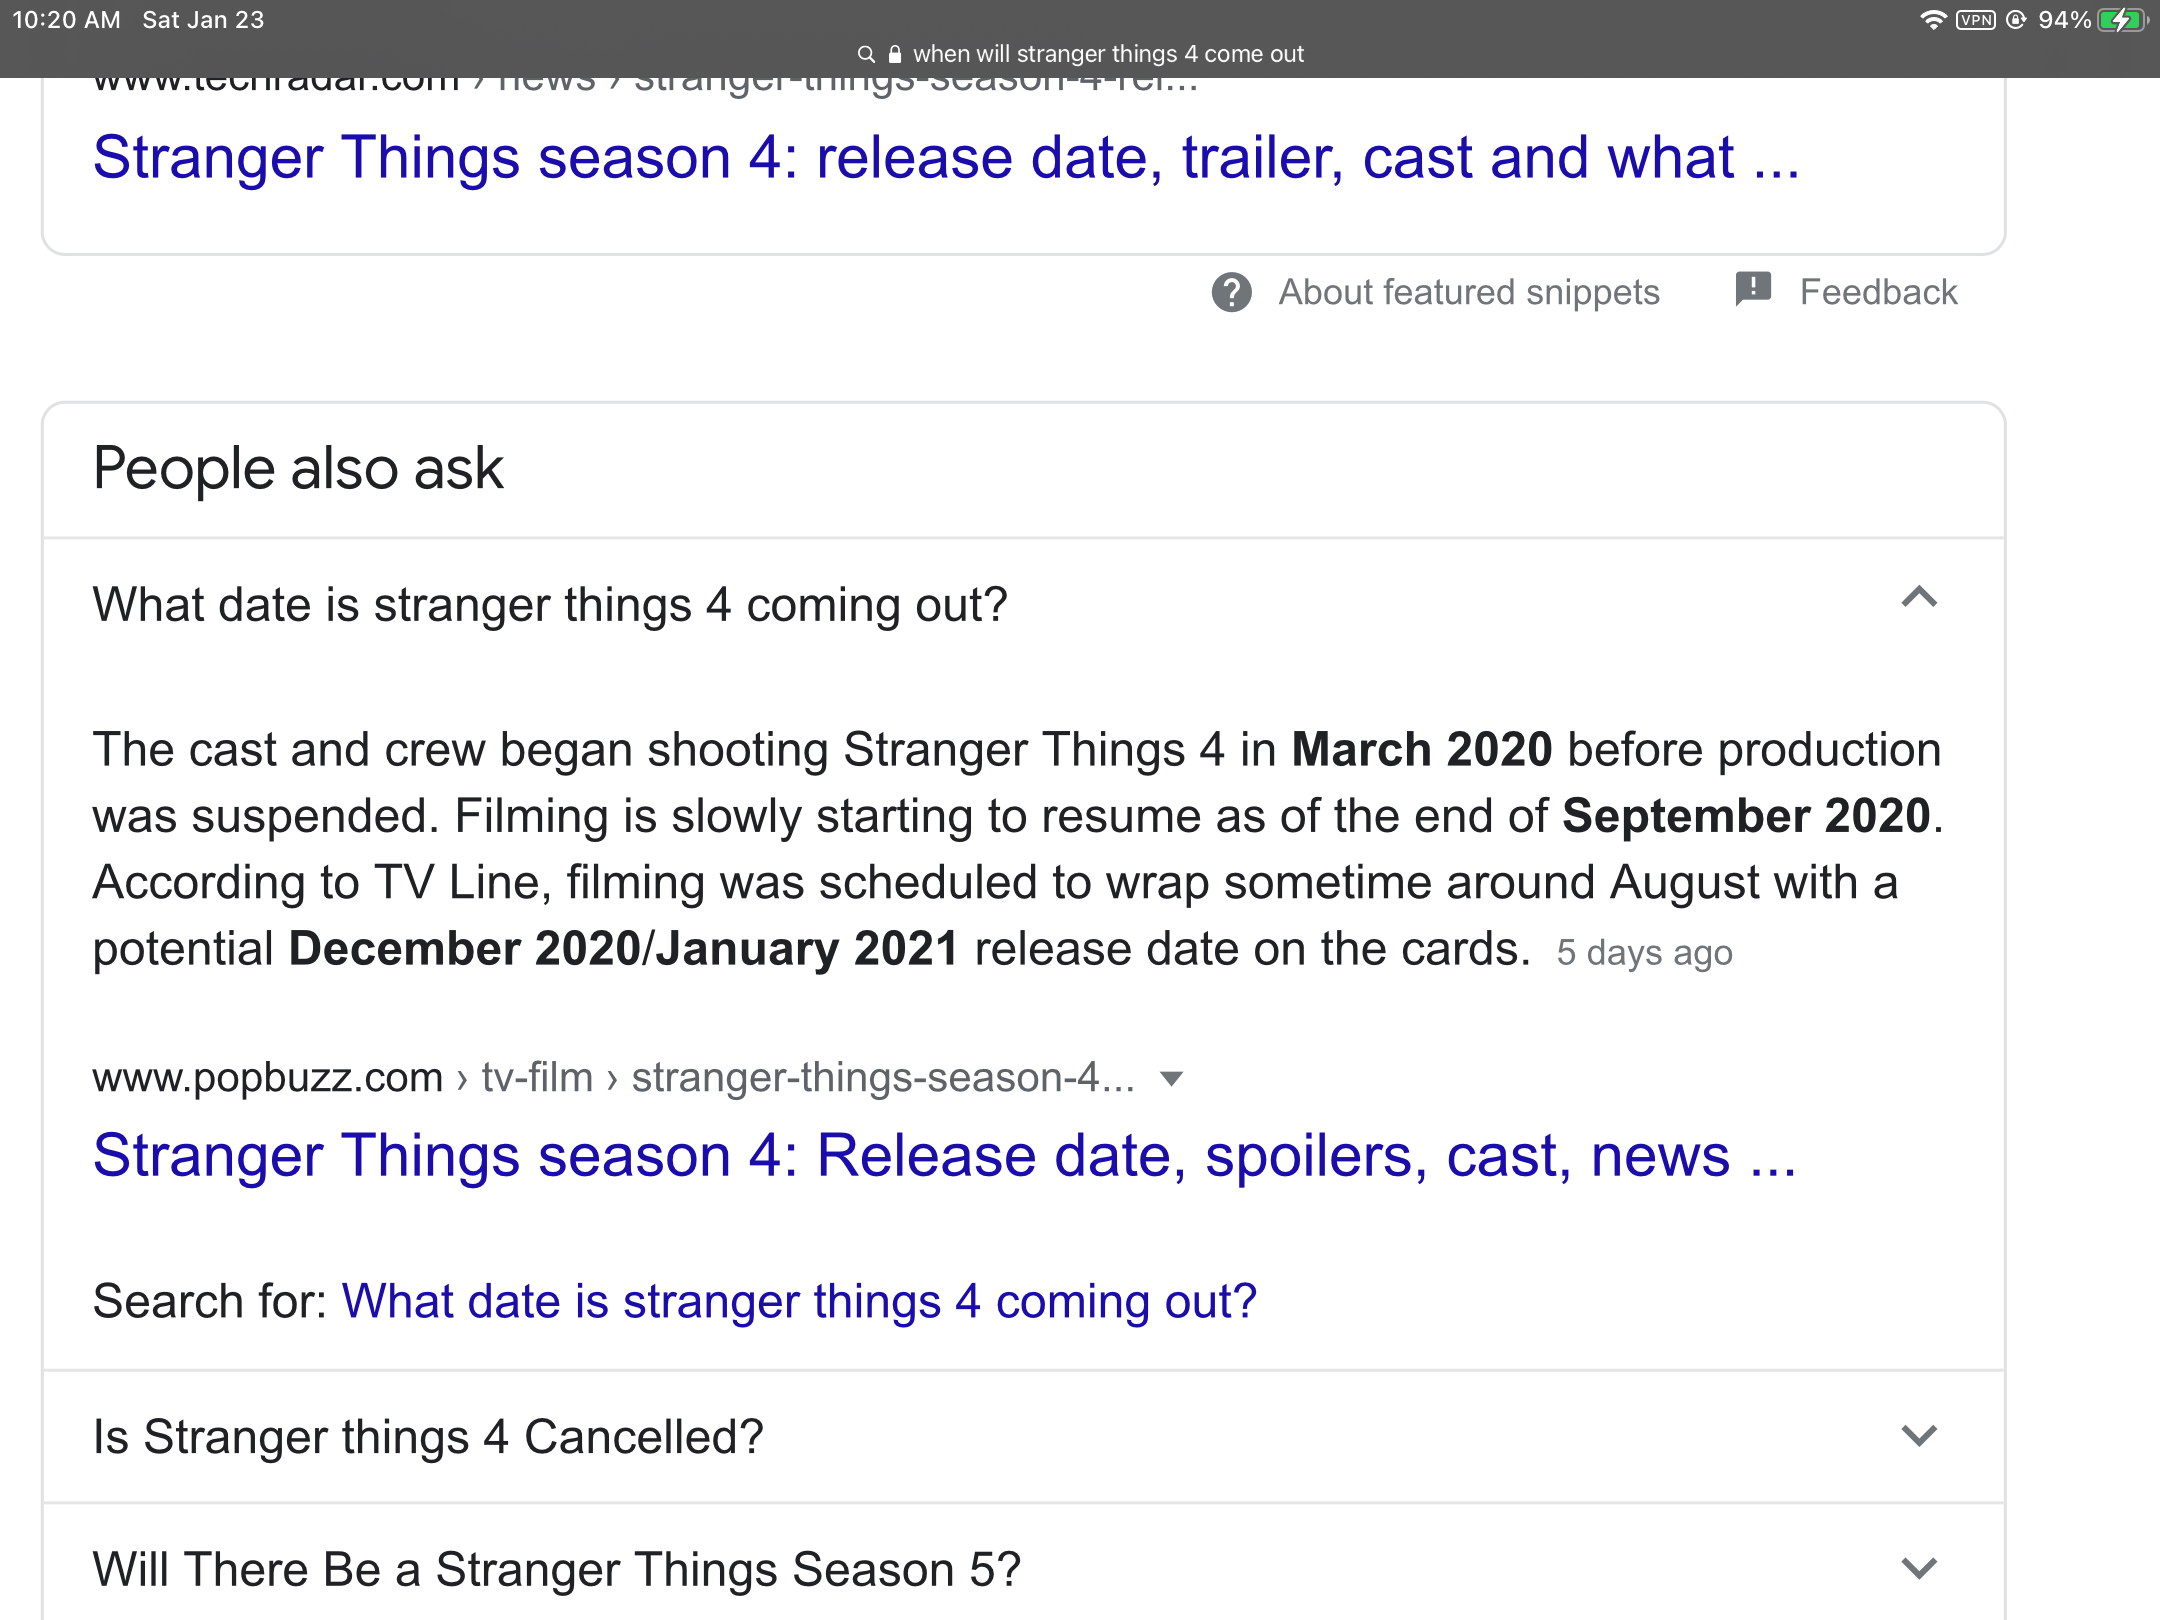 Stranger Things season 5: Release date, spoilers, cast, news and trailers -  PopBuzz